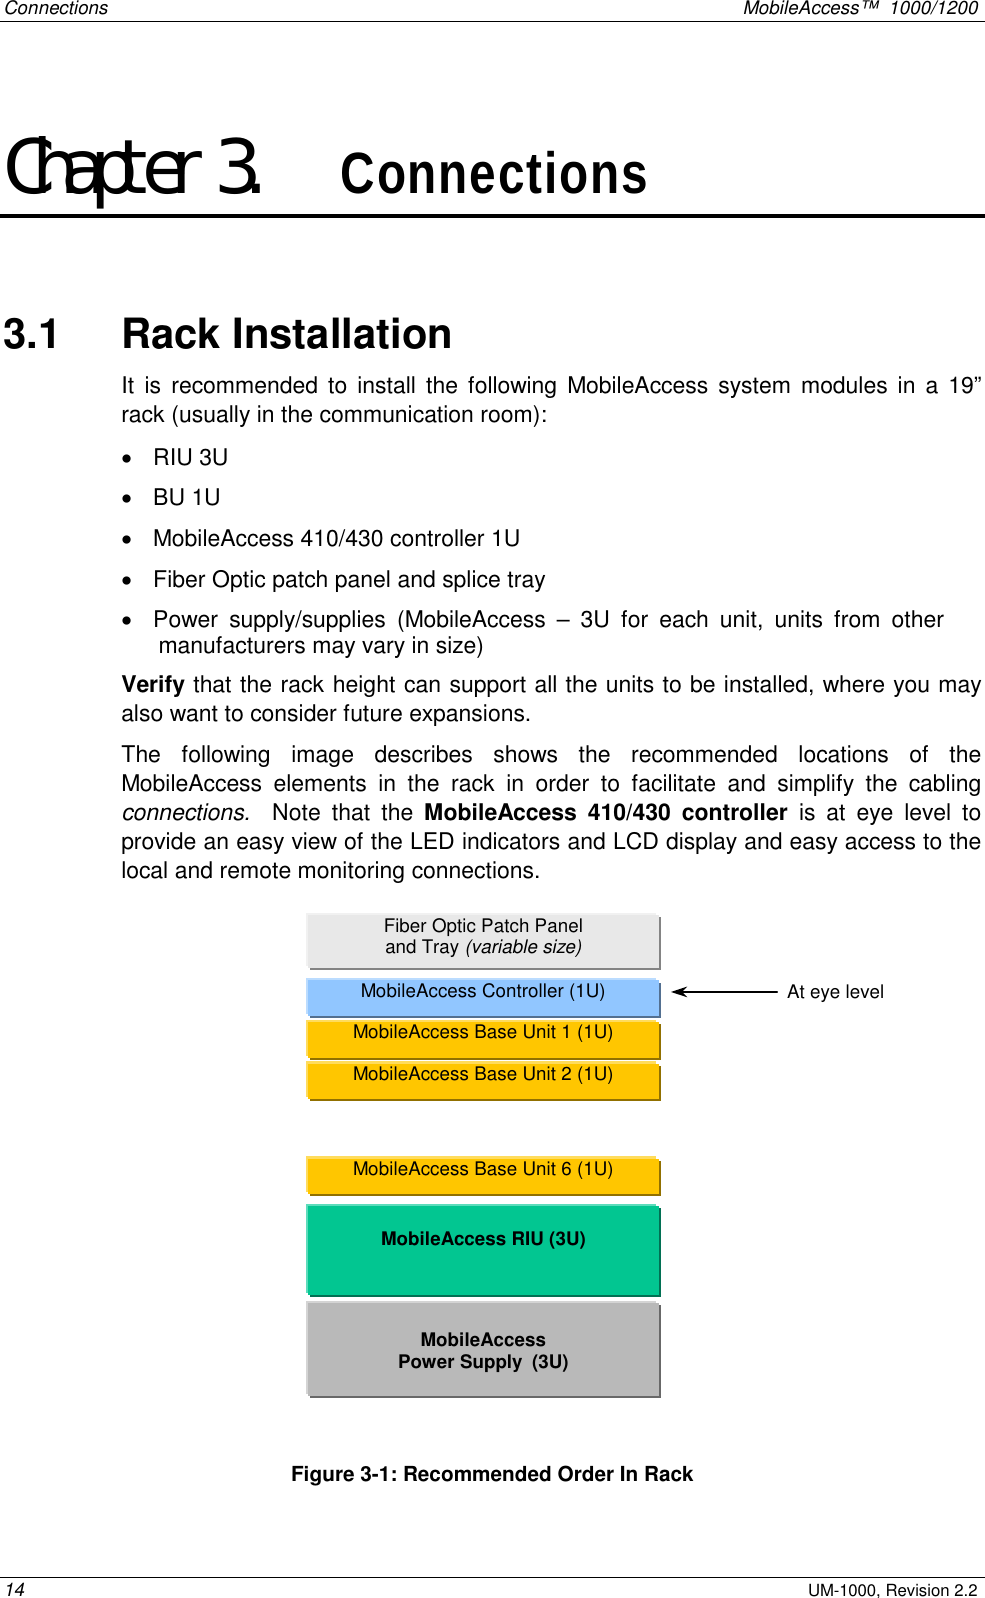 Connections    MobileAccess™  1000/1200 14 UM-1000, Revision 2.2 Chapter 3.    Connections 3.1   Rack Installation It is recommended to install the following MobileAccess system modules in a 19” rack (usually in the communication room): •  RIU 3U •  BU 1U  •  MobileAccess 410/430 controller 1U •  Fiber Optic patch panel and splice tray •  Power supply/supplies (MobileAccess – 3U for each unit, units from other manufacturers may vary in size) Verify that the rack height can support all the units to be installed, where you may also want to consider future expansions. The following image describes shows the recommended locations of the MobileAccess elements in the rack in order to facilitate and simplify the cabling connections.  Note that the MobileAccess 410/430 controller is at eye level to provide an easy view of the LED indicators and LCD display and easy access to the local and remote monitoring connections.             Figure  3-1: Recommended Order In Rack MobileAccess Controller (1U)  MobileAccess RIU (3U)  MobileAccess  Power Supply  (3U) Fiber Optic Patch Panel  and Tray (variable size) At eye level MobileAccess Base Unit 6 (1U) MobileAccess Base Unit 1 (1U) MobileAccess Base Unit 2 (1U) 